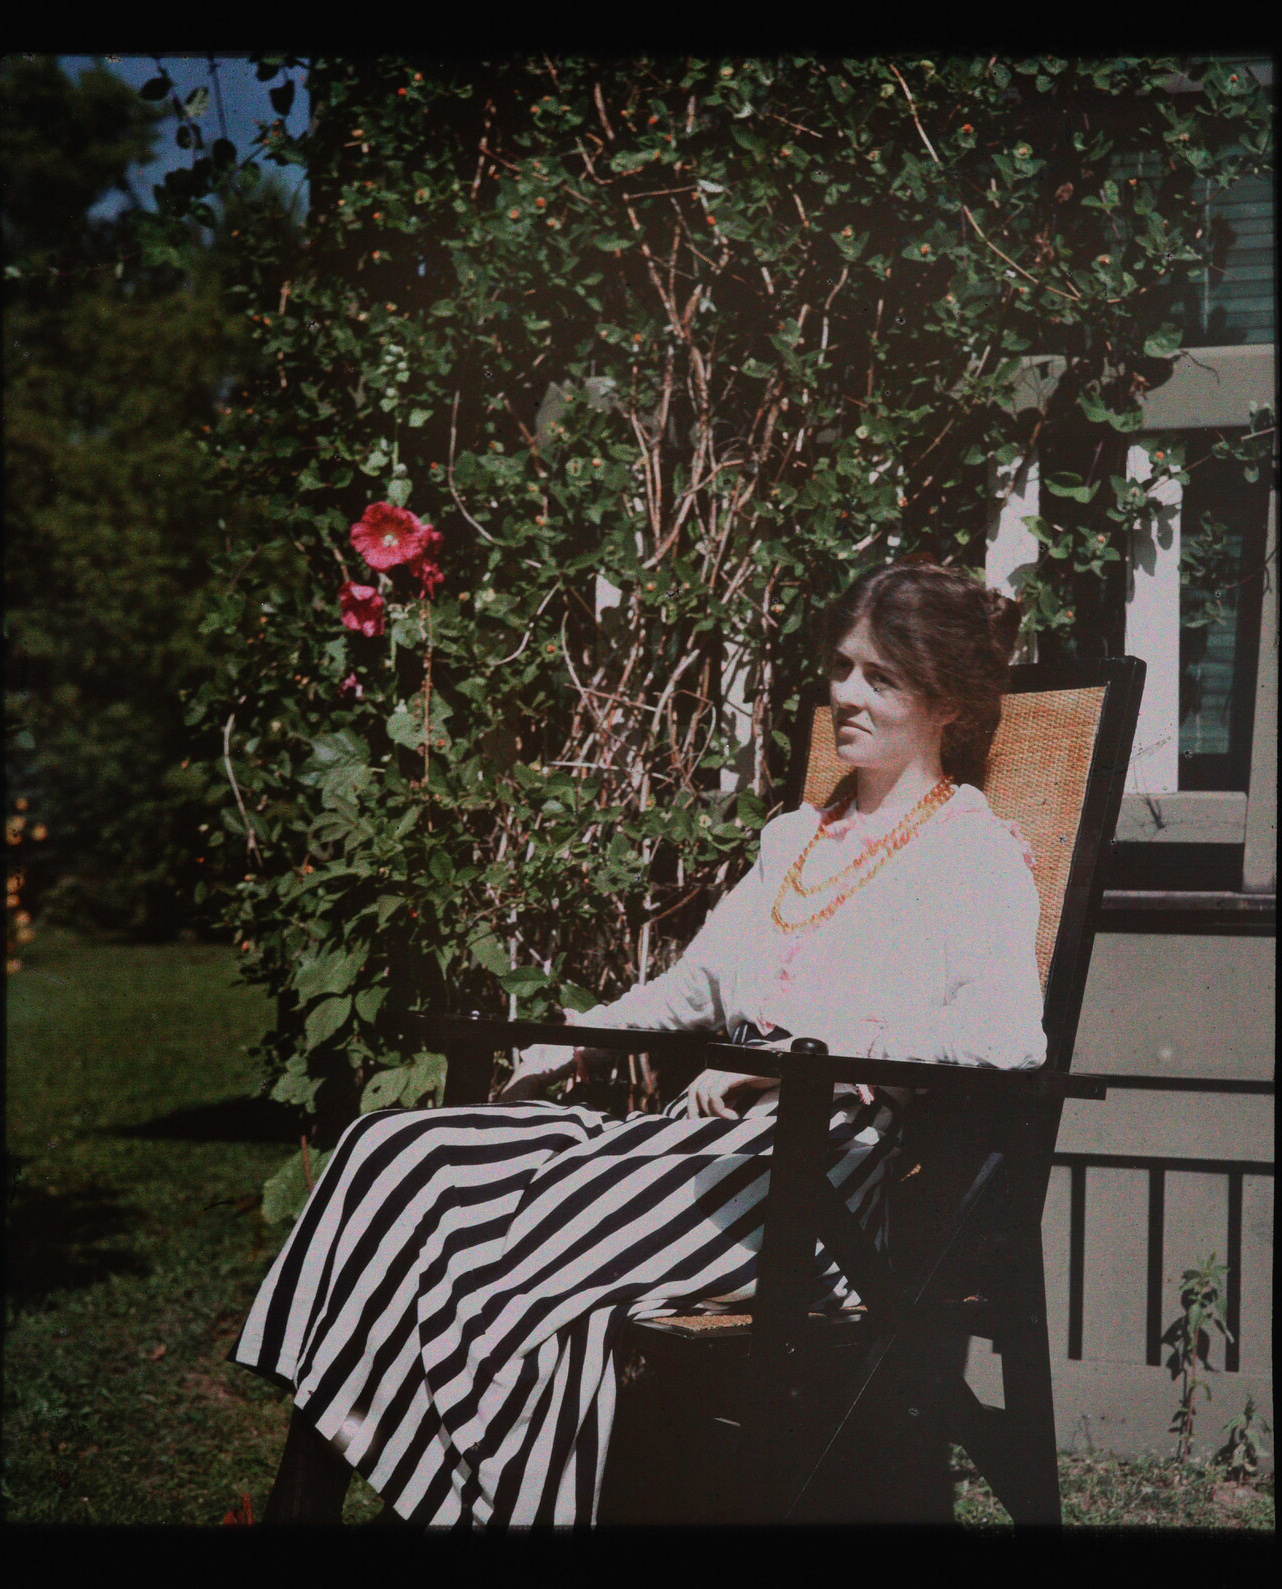 Laura Gilpin (1891-1979) :: [Woman in black and white striped skirt seated in chair], ca. 1910s. Autochrome. Amon Carter Museum